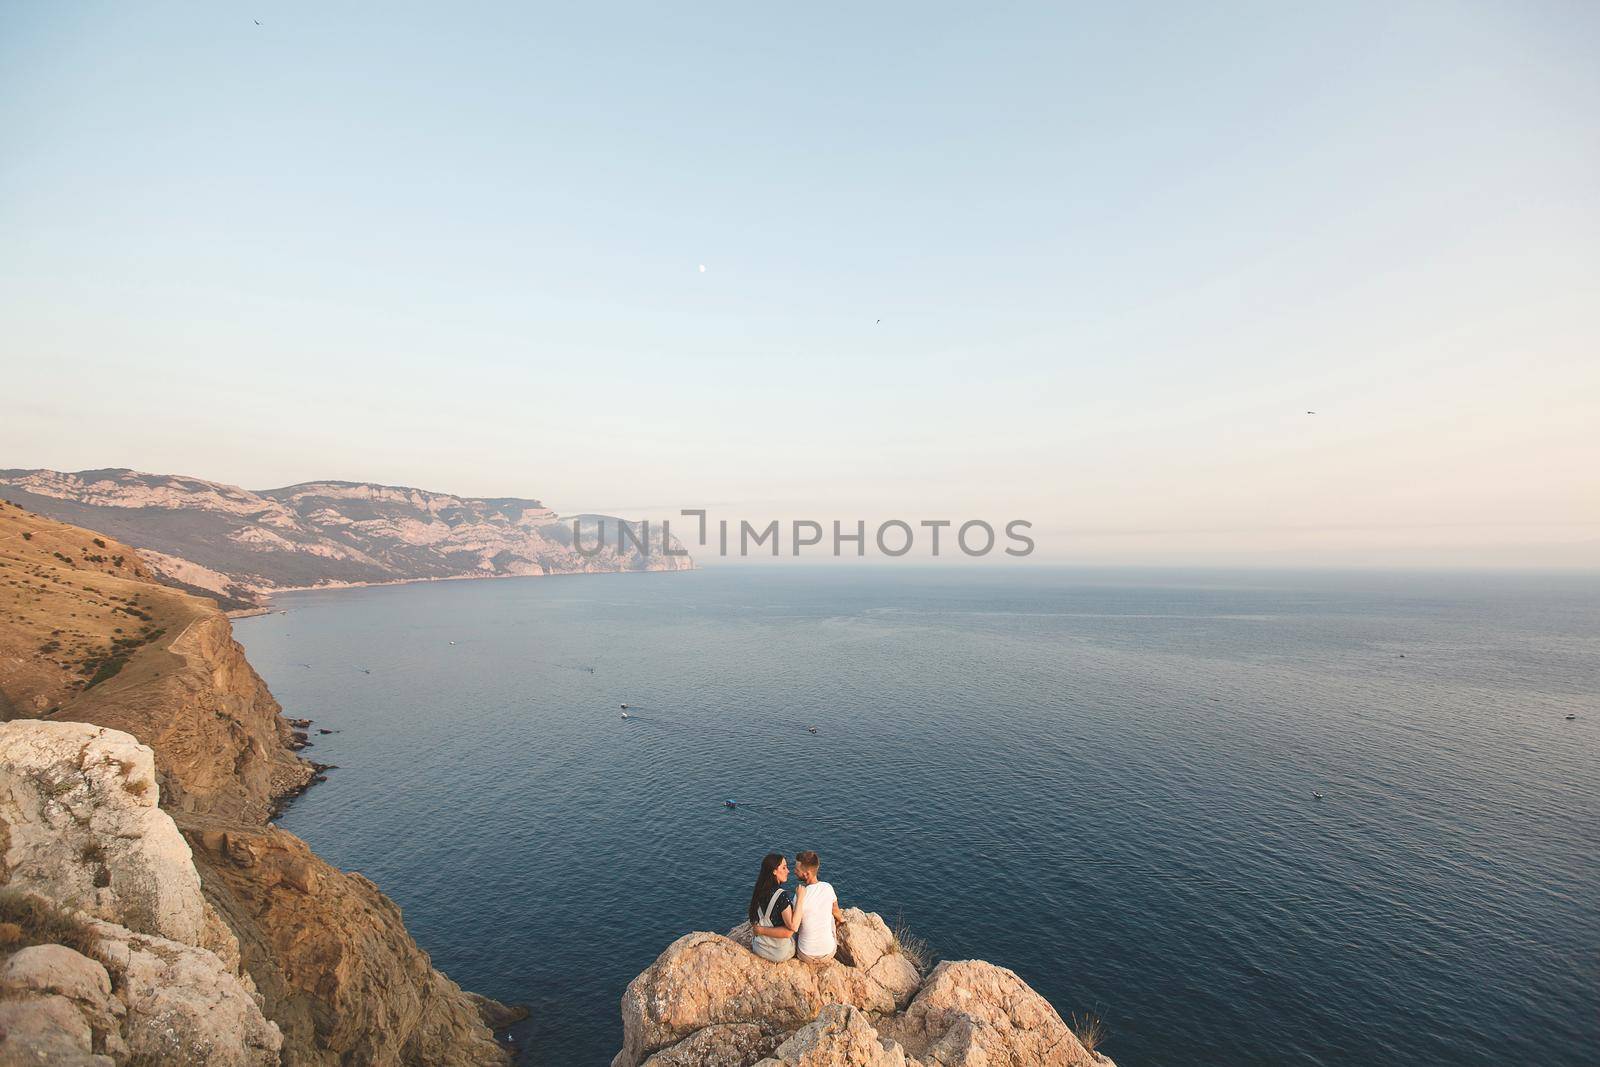 Guy and girl, on the edge of the cliff against the backdrop of mountains and ocean